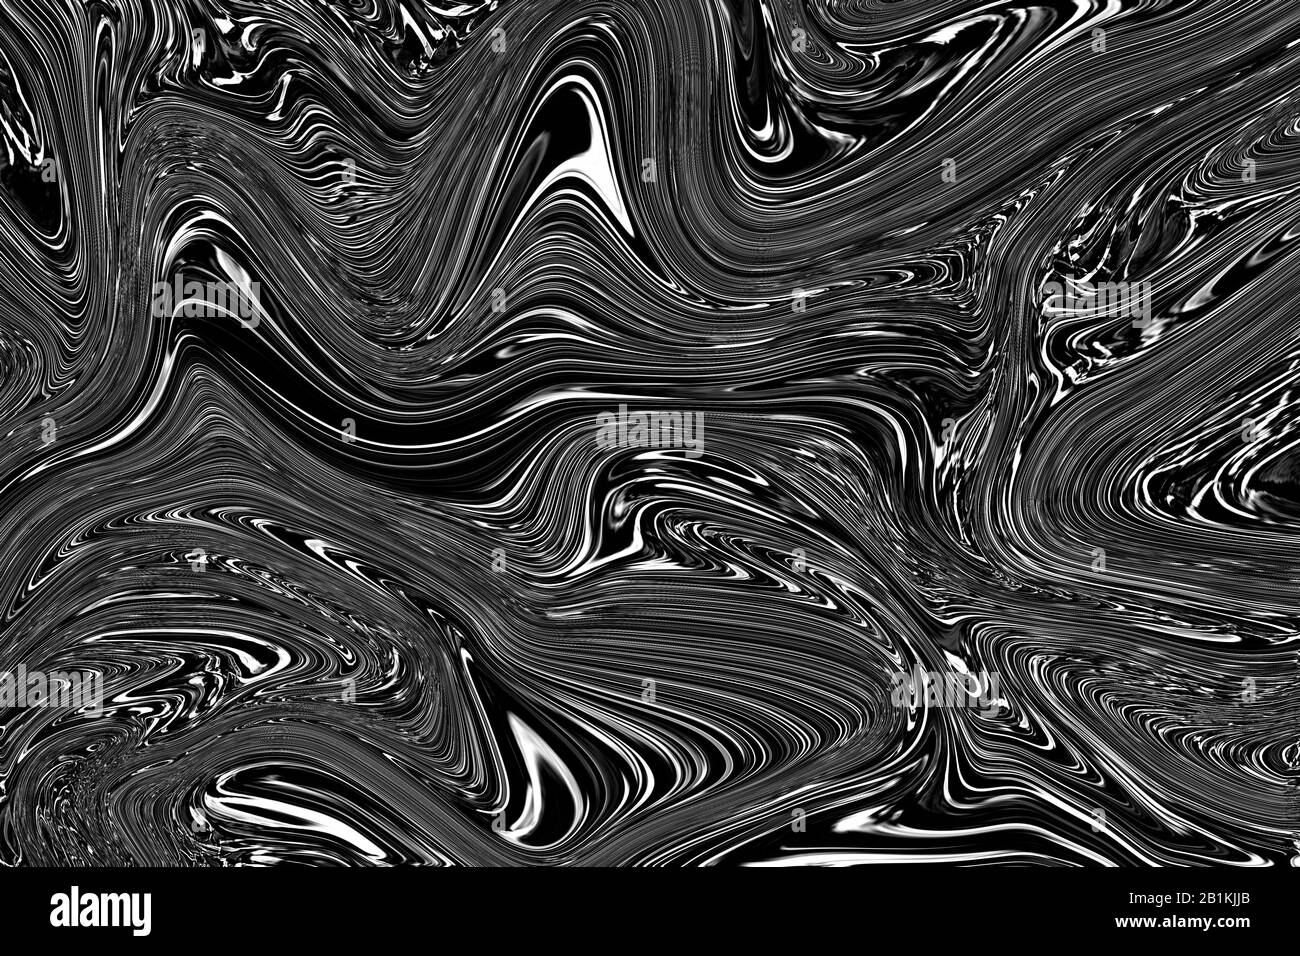 white and black liquid color. abstract background and texture. illustration design. Stock Photo